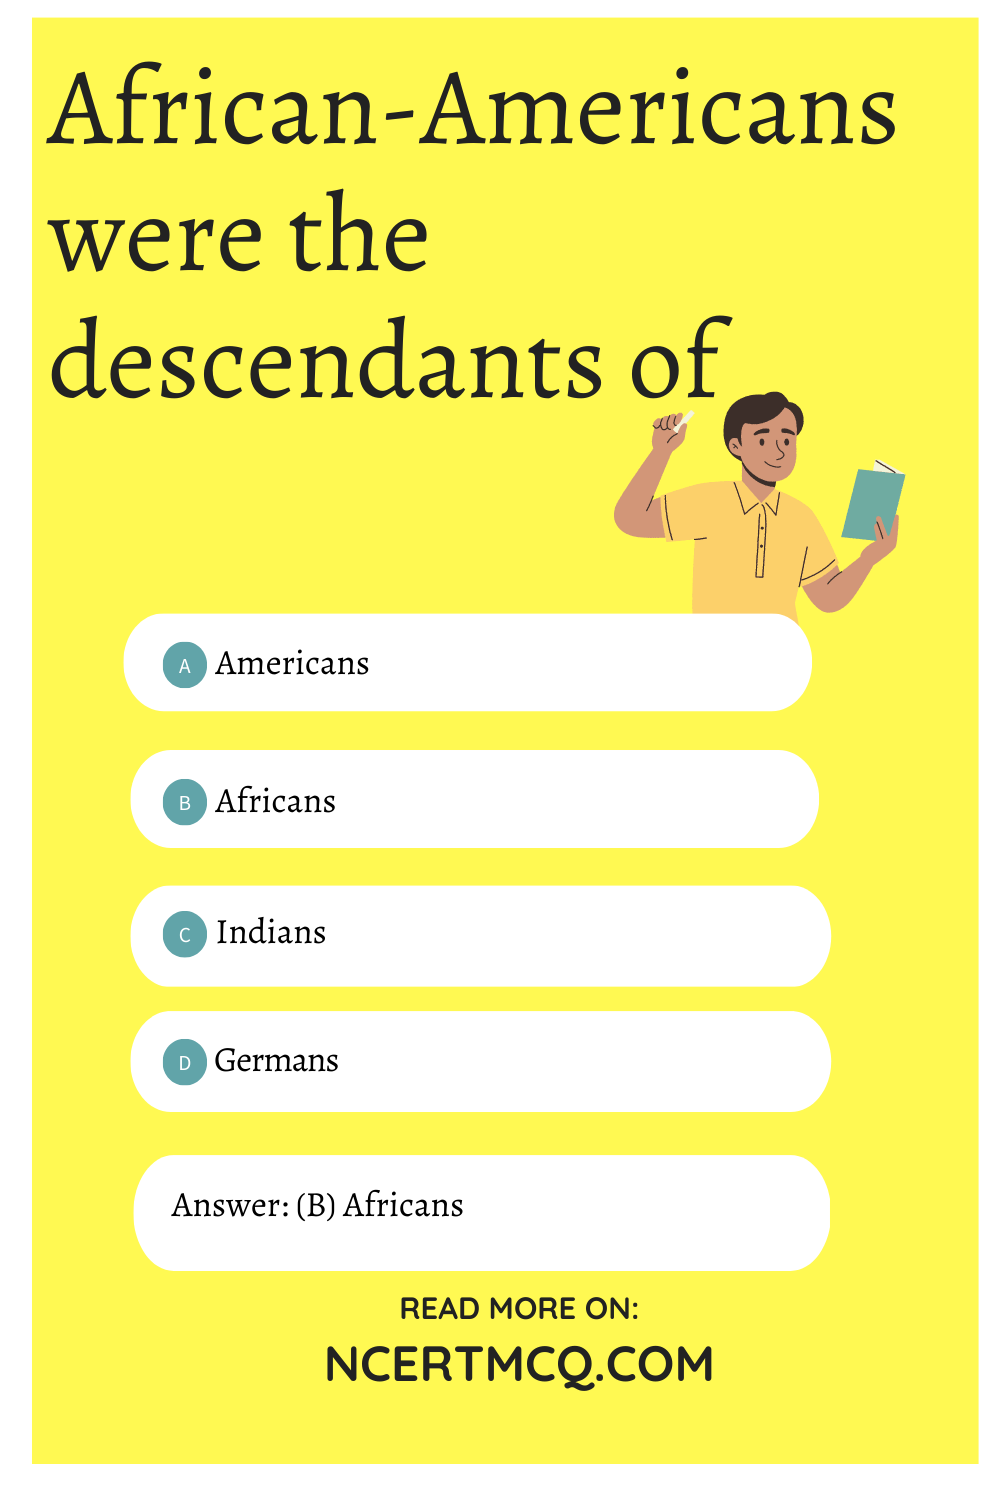 African-Americans were the descendants of